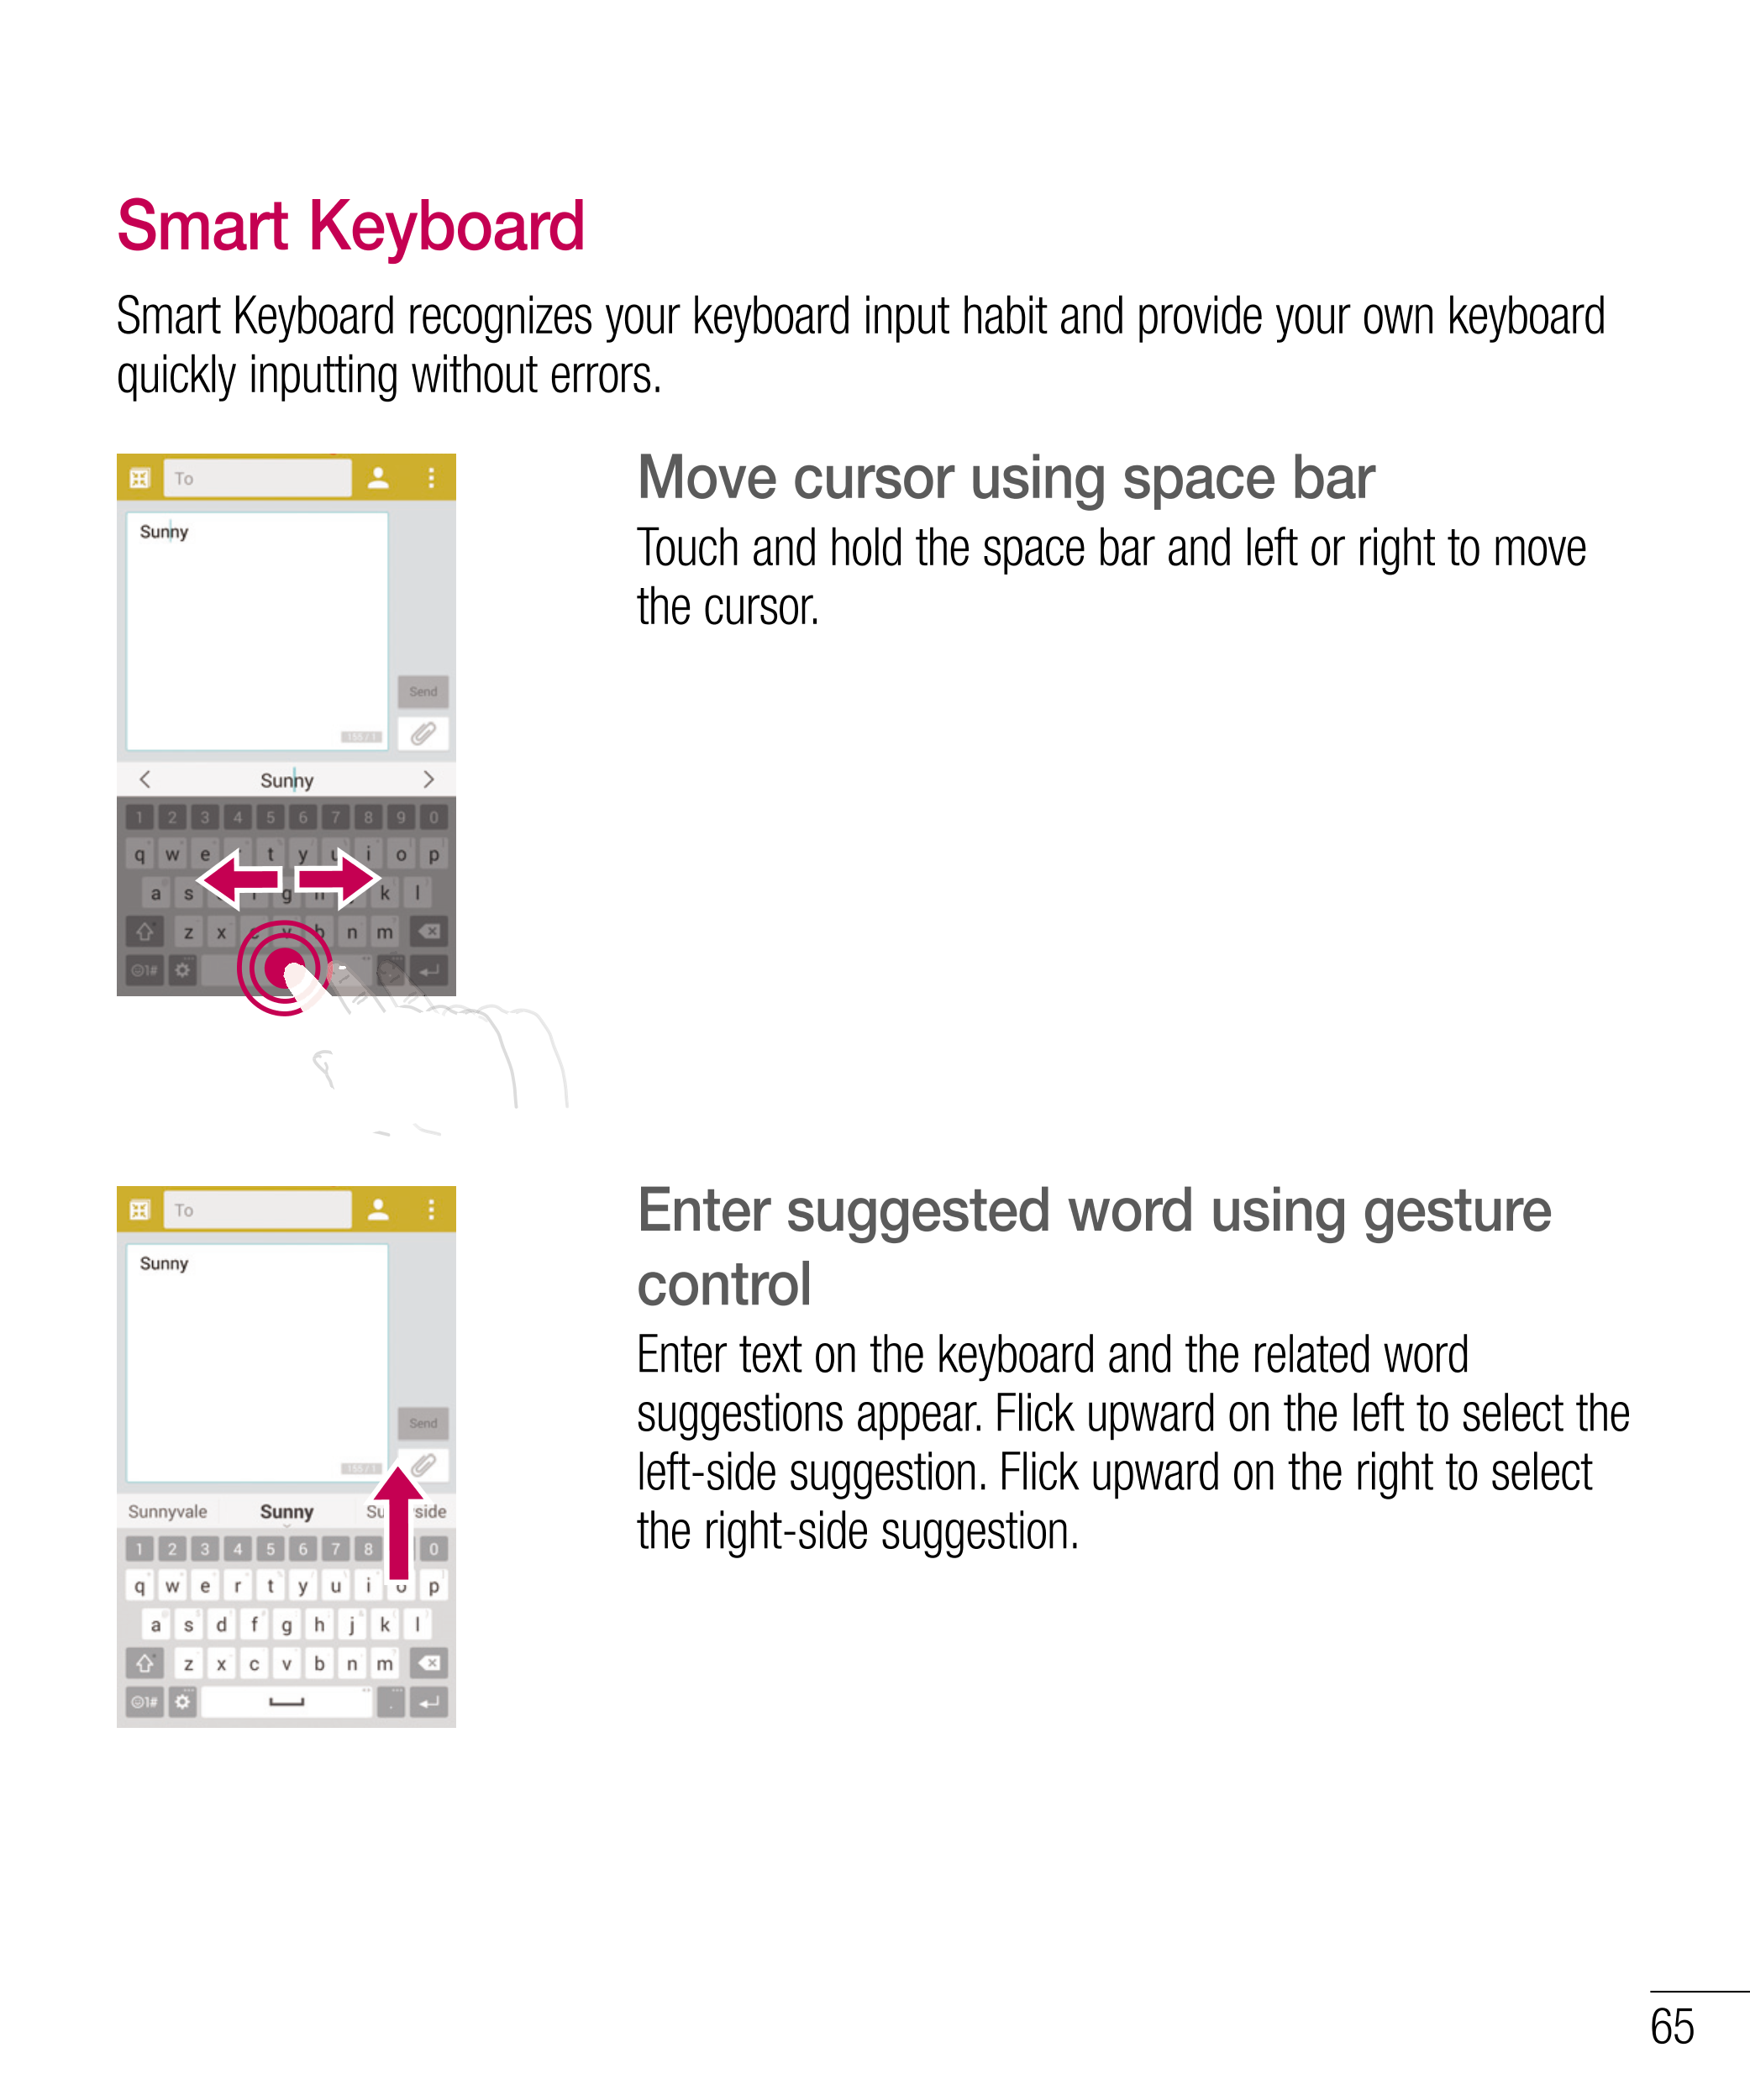 Smart Keyboard
Smart Keyboard recognizes your keyboard input habit and provide your own keyboard 
quickly inputting without erro